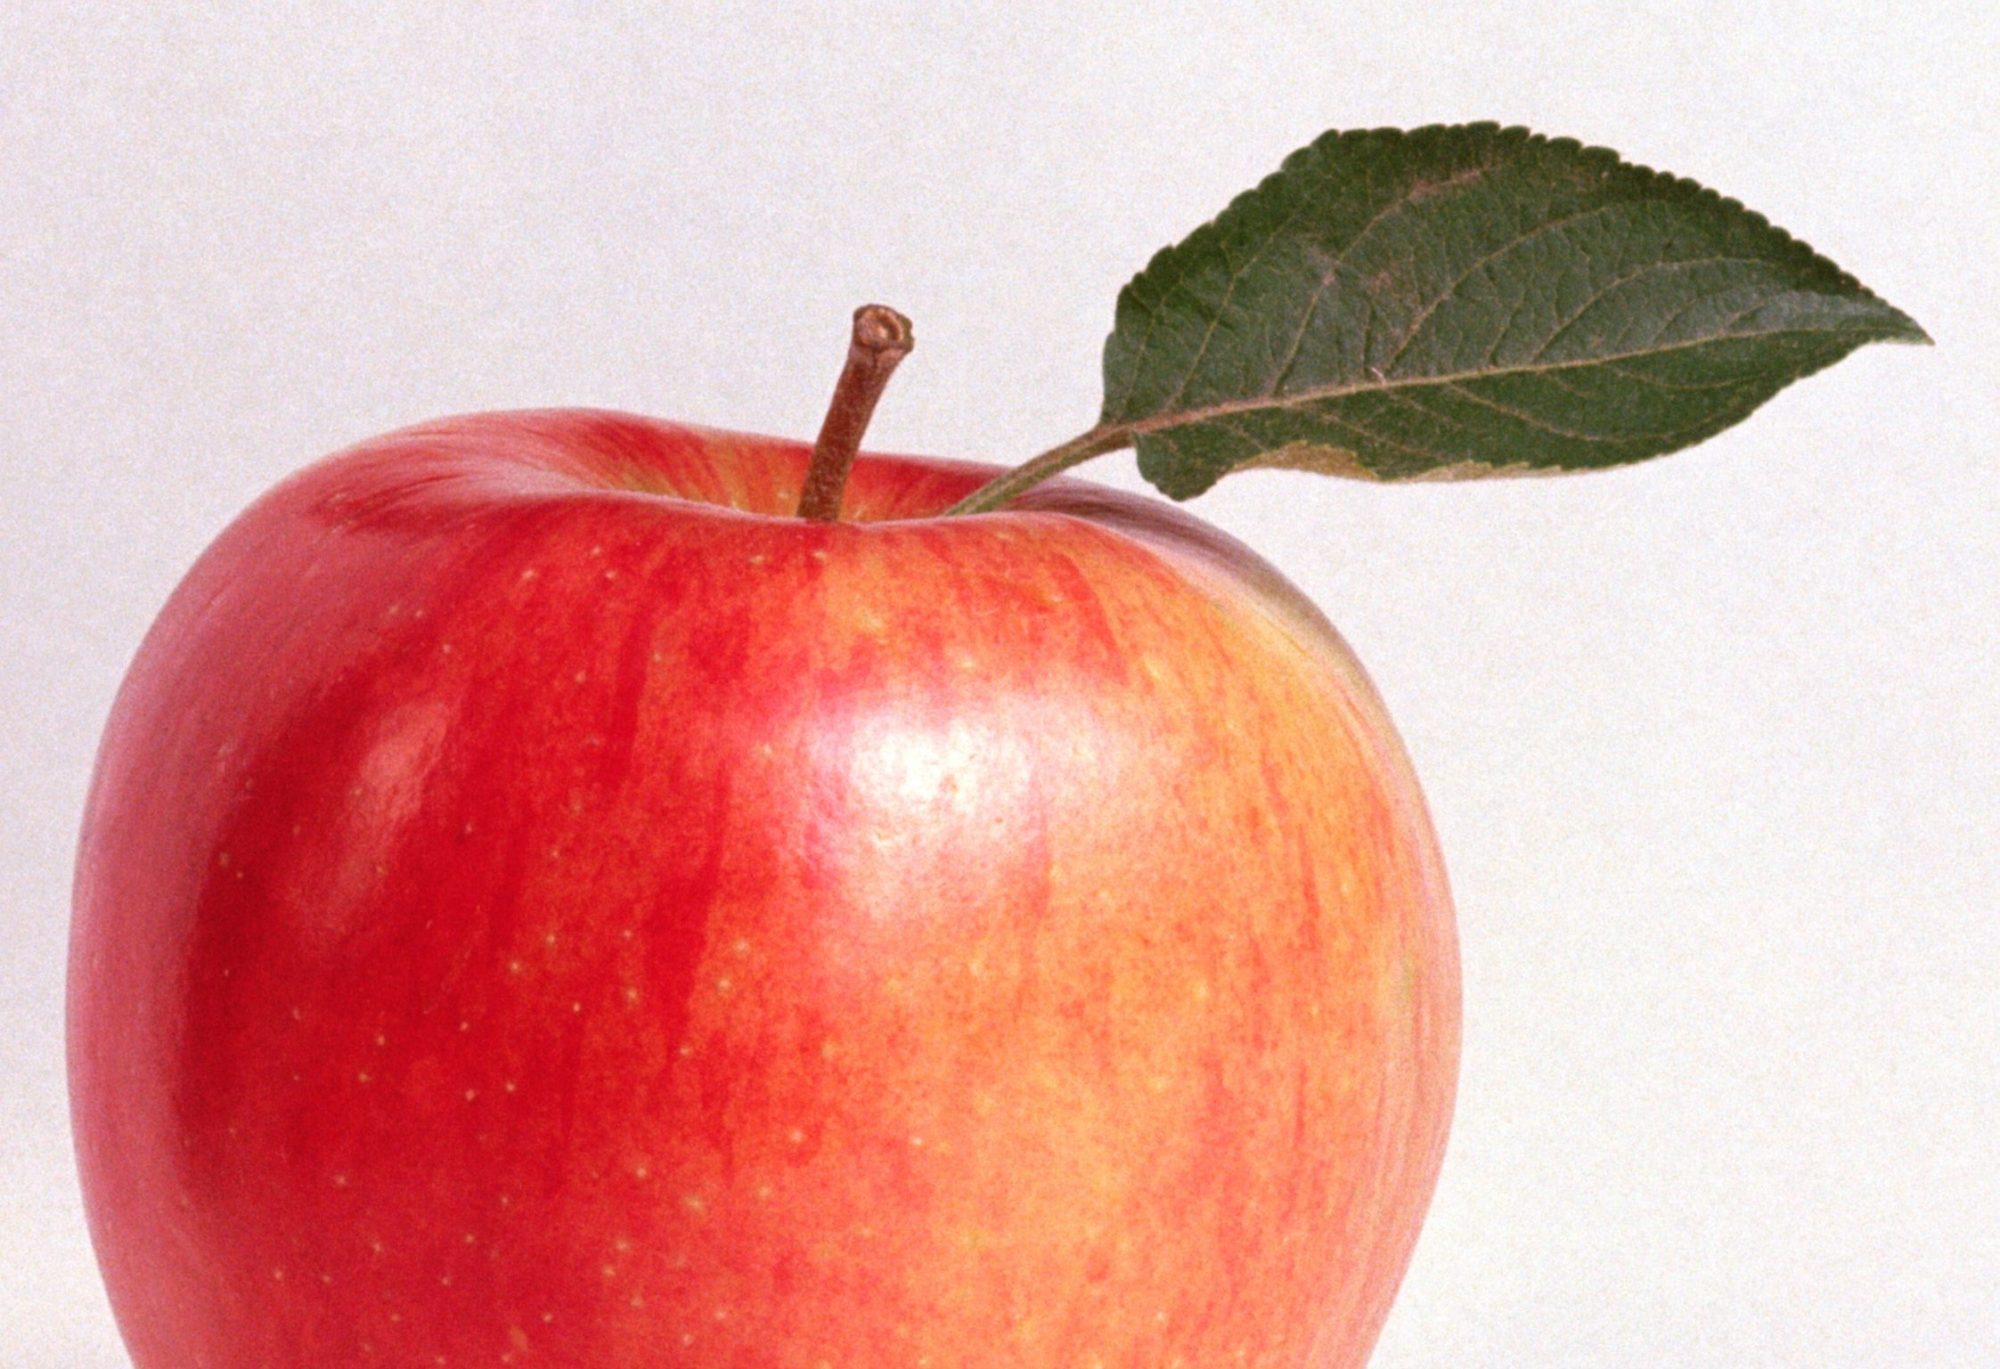 A single apple with small leaf